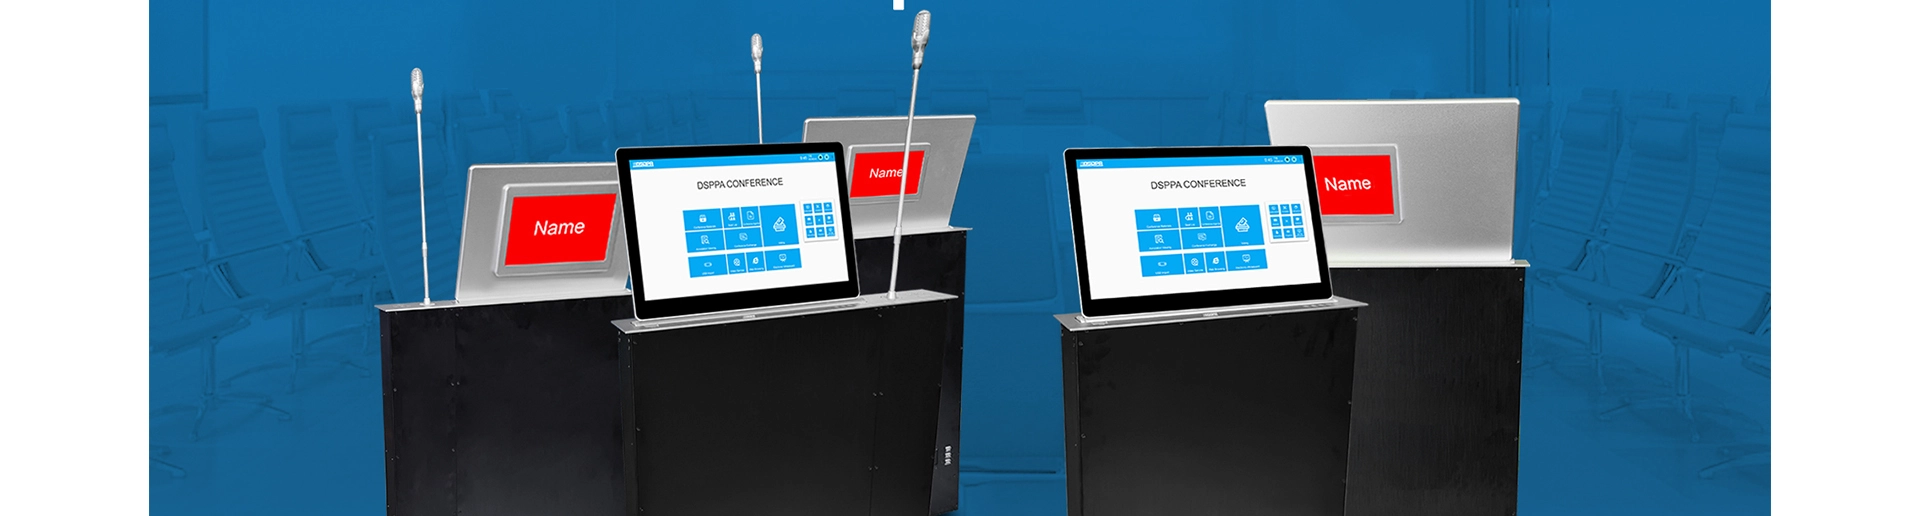 Paperless Conference System Projection Switcher